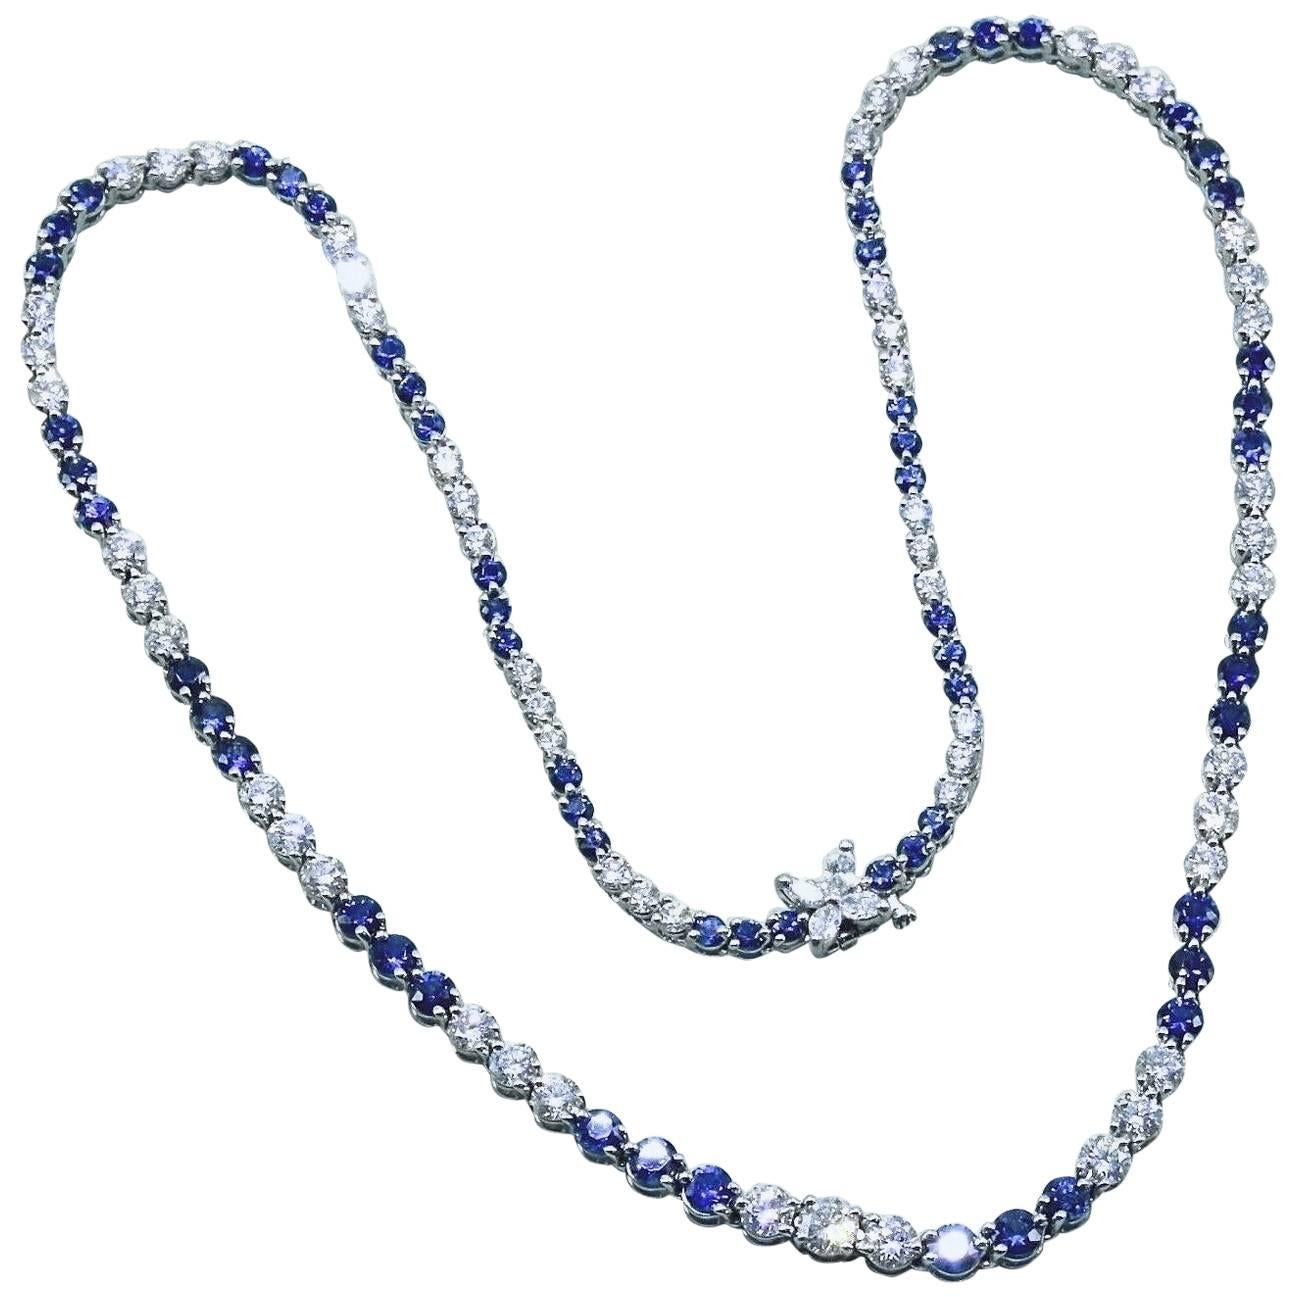 Tiffany and Co. Victoria Diamond and Sapphire Necklace 11.68 TCW ...